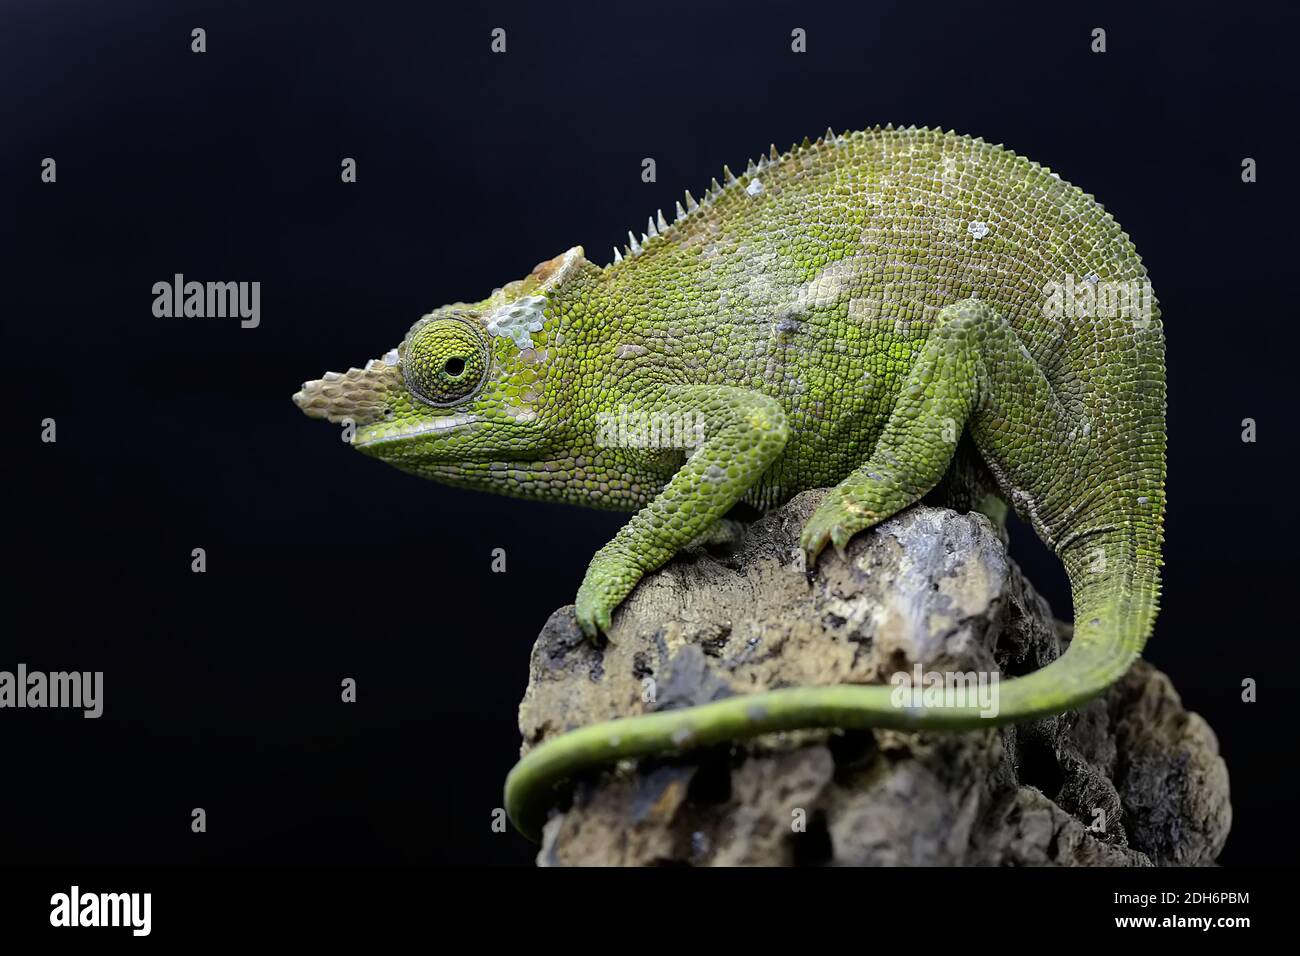 A young Fischer's chameleon (Kinyongia fisheri) are crawling on Polianthes tuberosa flowers. Stock Photo